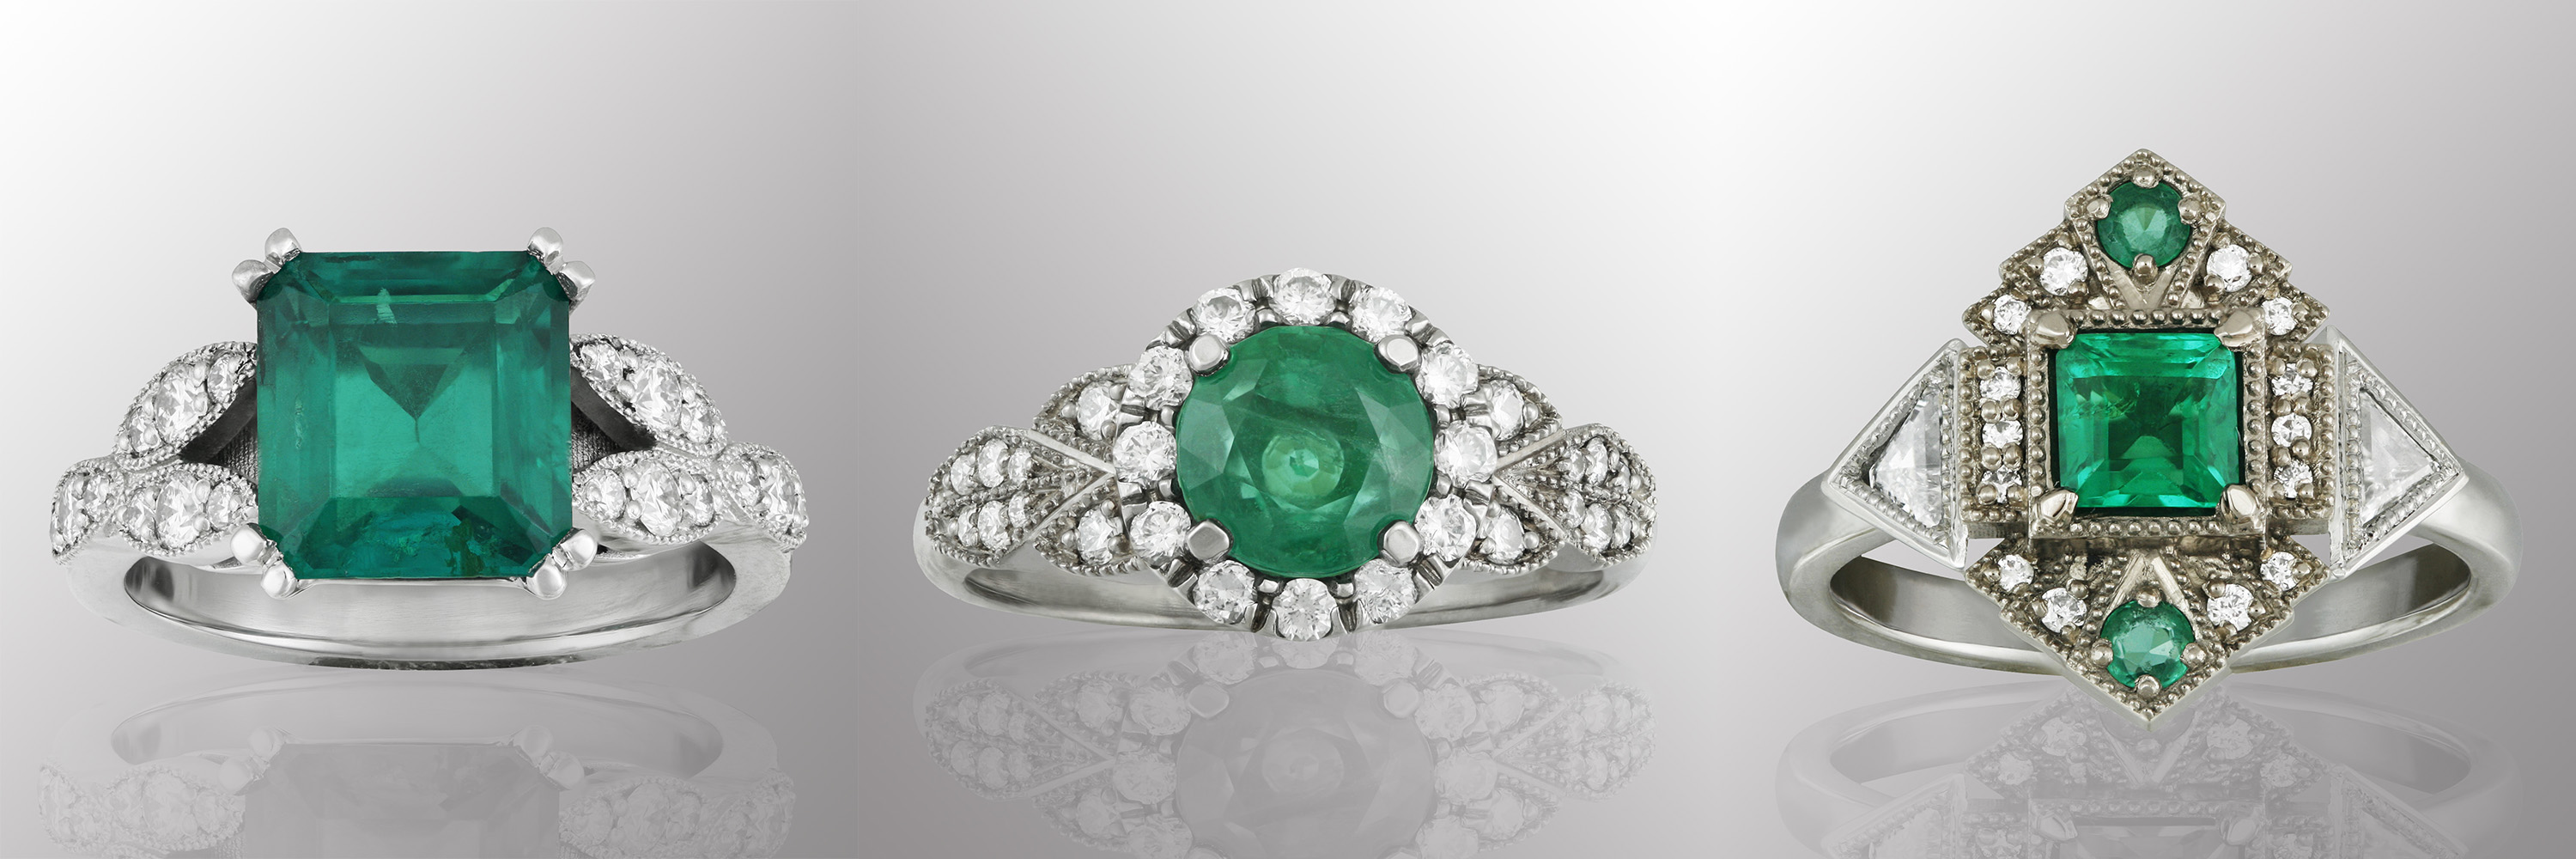 Our Emerald Engagement Ring Designs